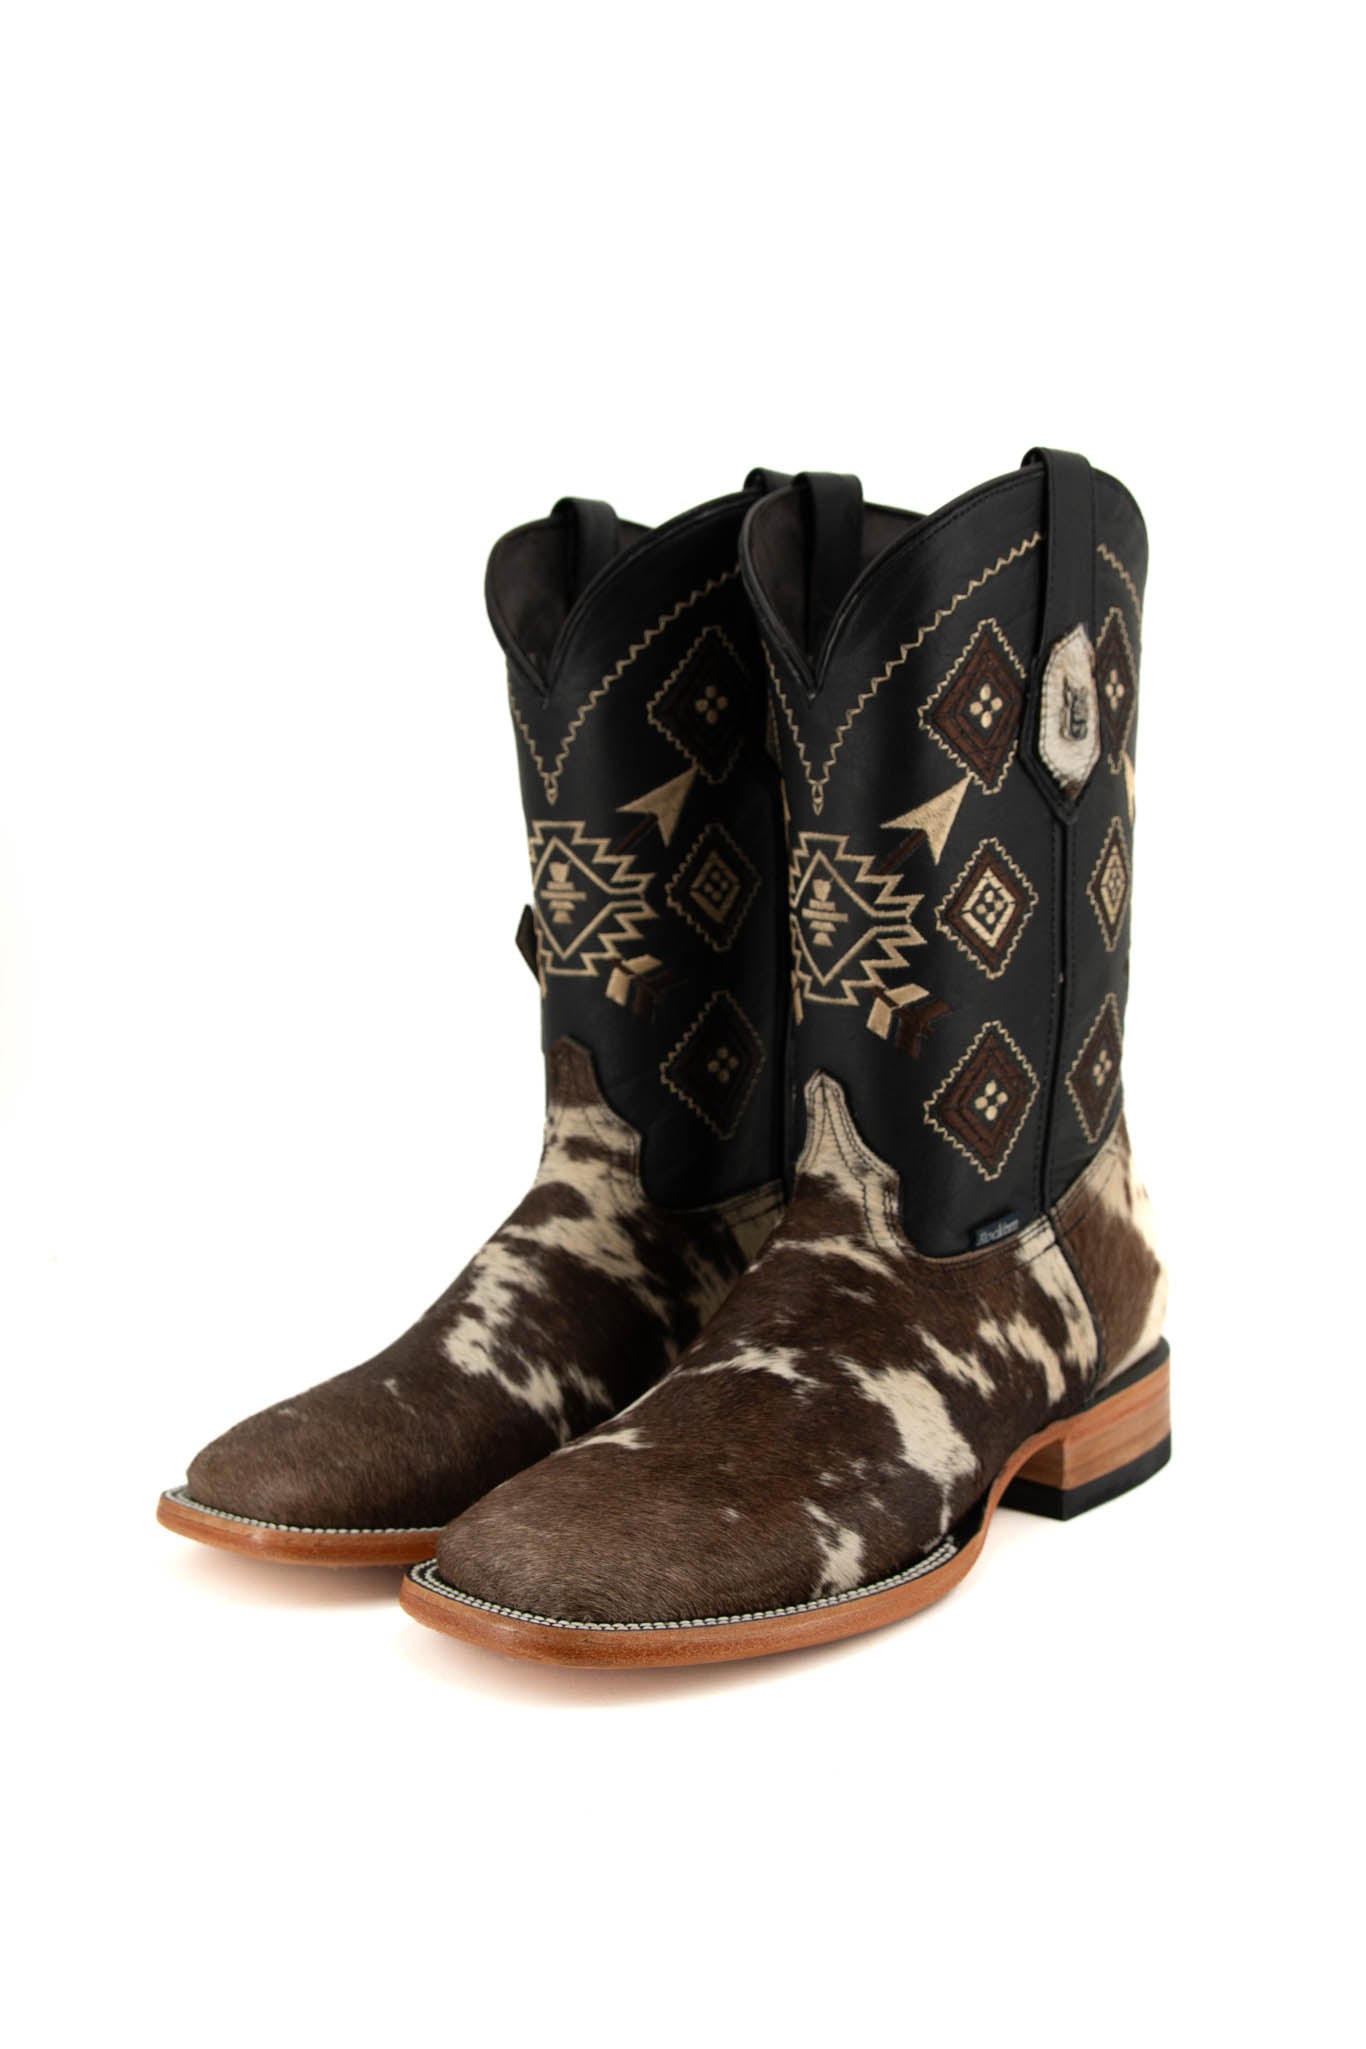 Men's Cowhide Boots Size 7 Box 1F (As Seen On Image)